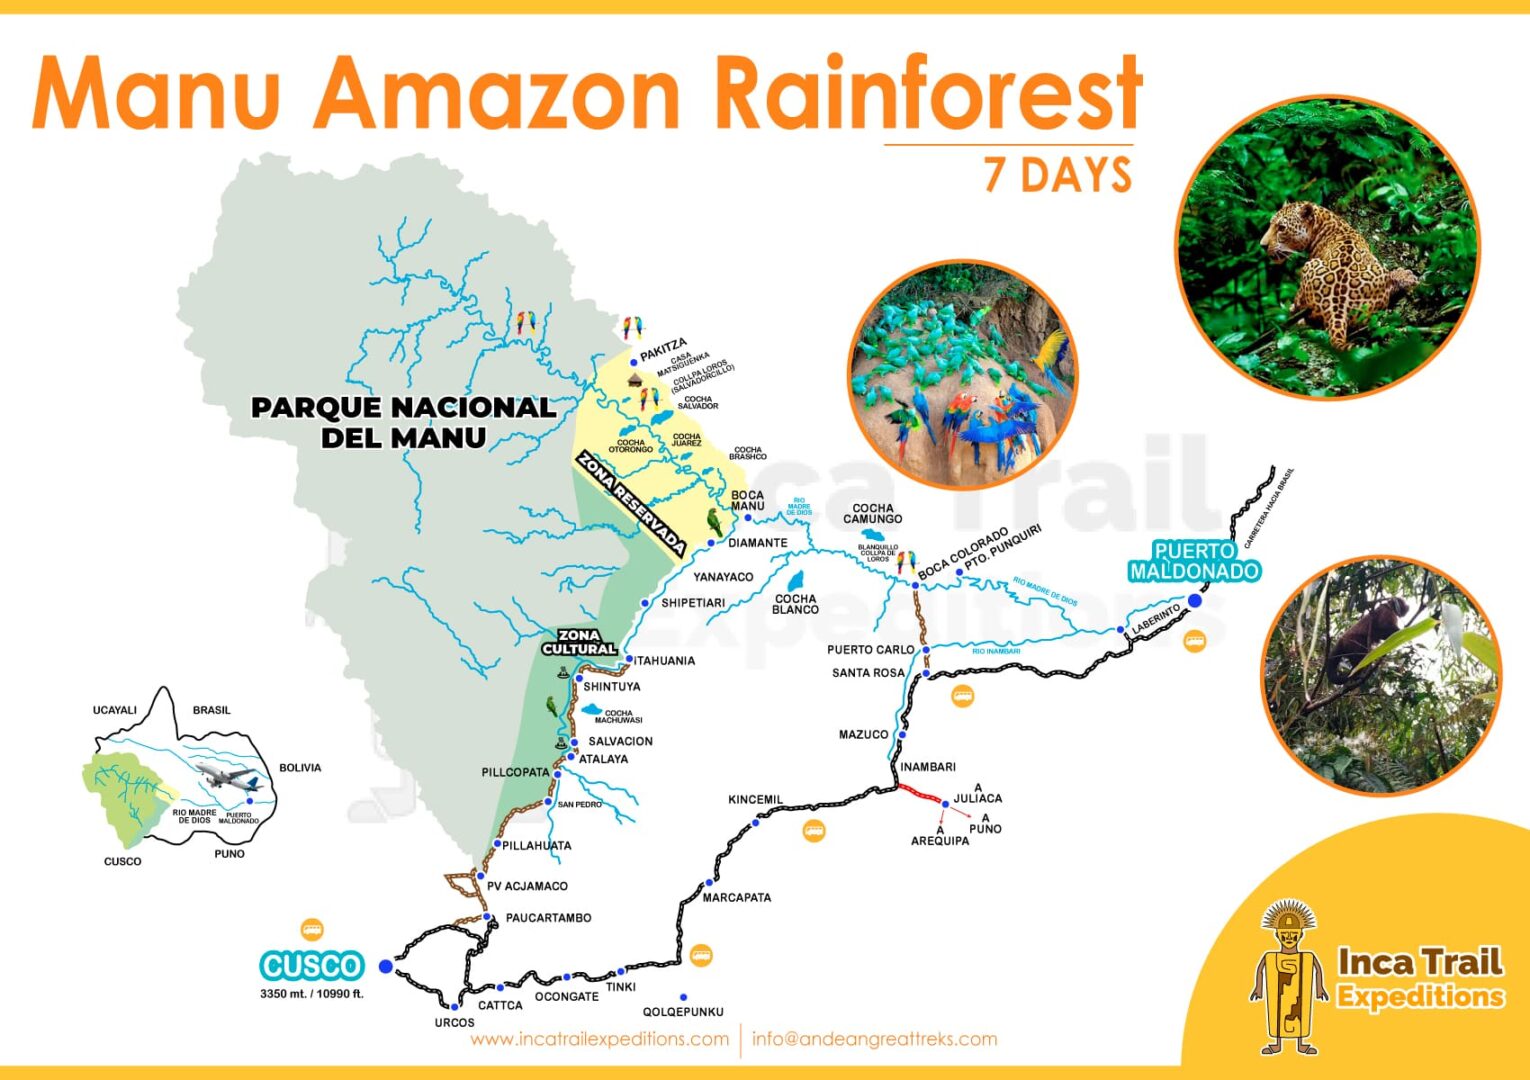 MANU-AMAZON-RAINFOREST-7-DAYS-BY-INCA-TRAIL-EXPEDITIONS